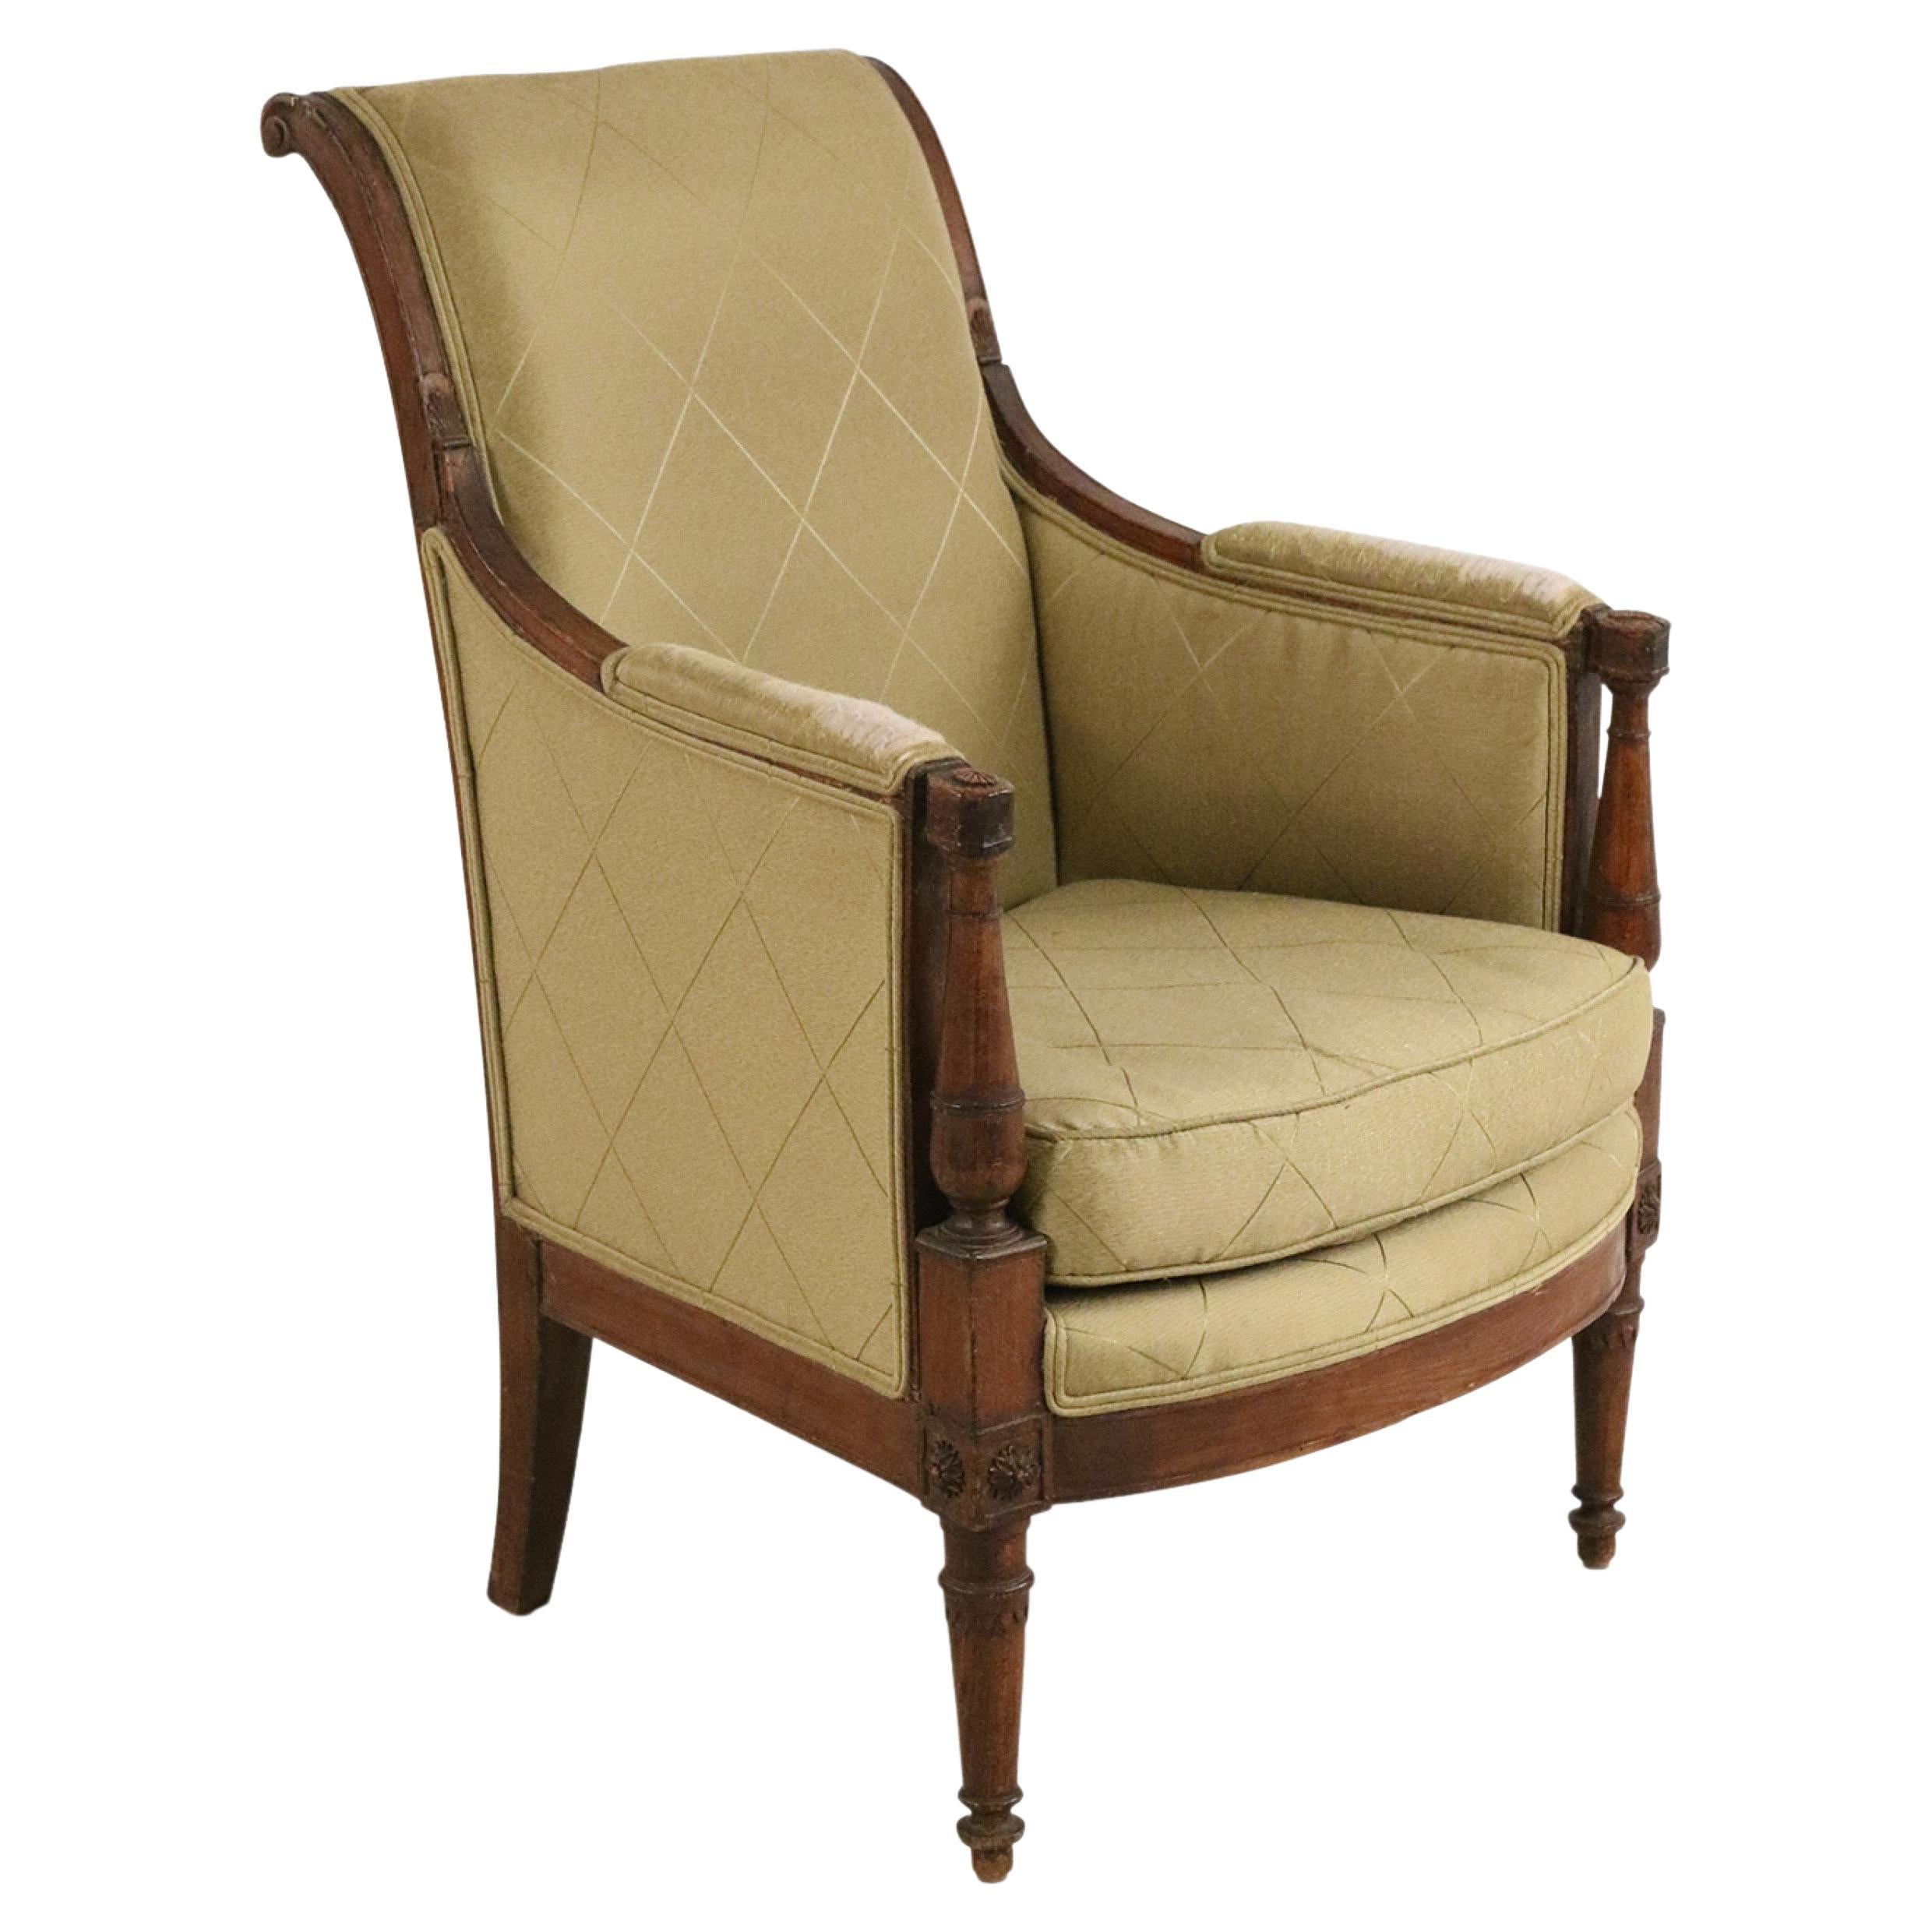 French Directoire Green Diamond Pattern Upholstered Mahogany Bergere Armchair For Sale